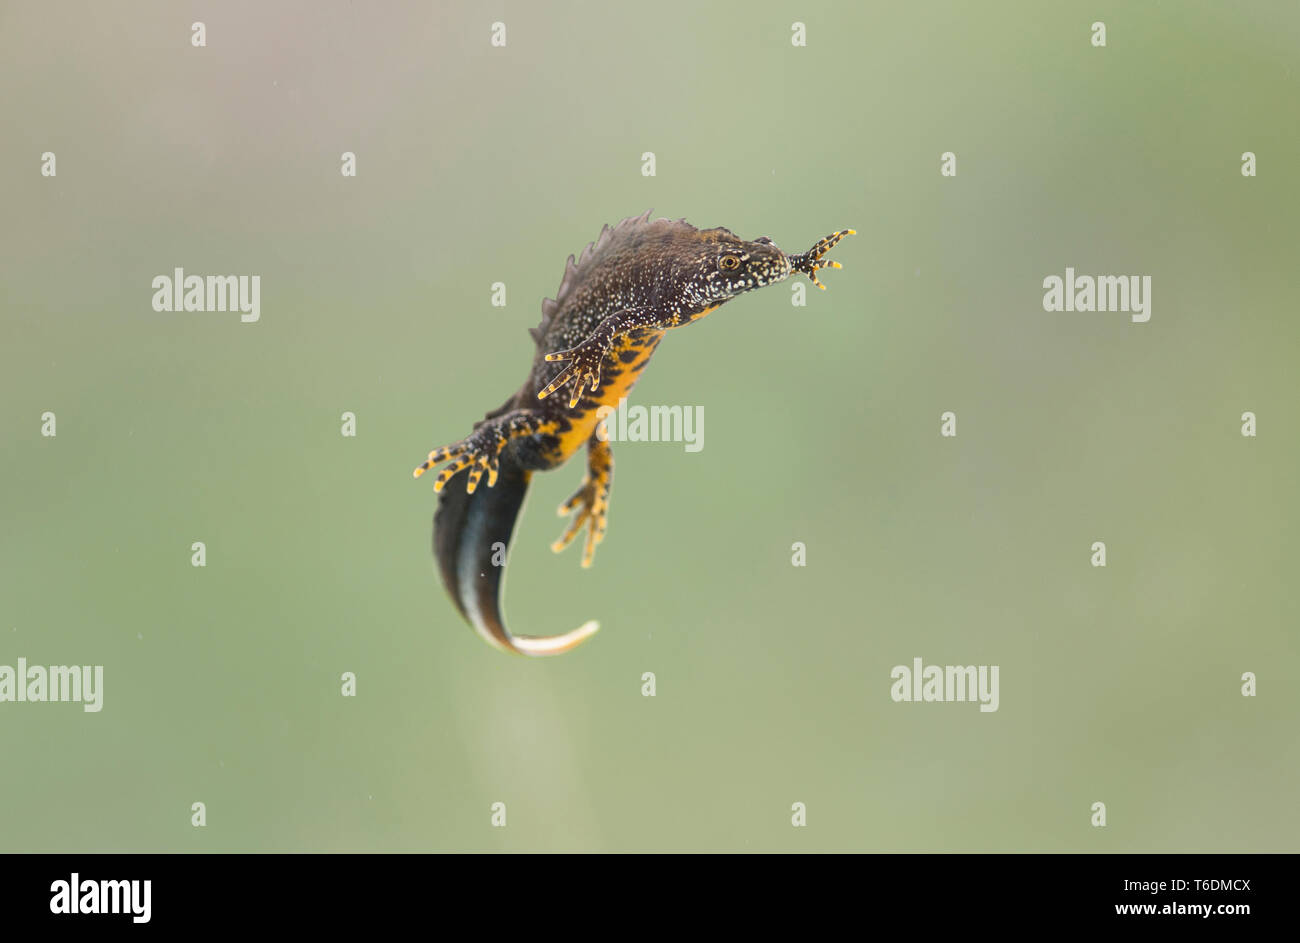 A male Great crested newt (Triturus cristatus) swimming. Photographed during the breeding season. Photographed in controlled conditions Stock Photo